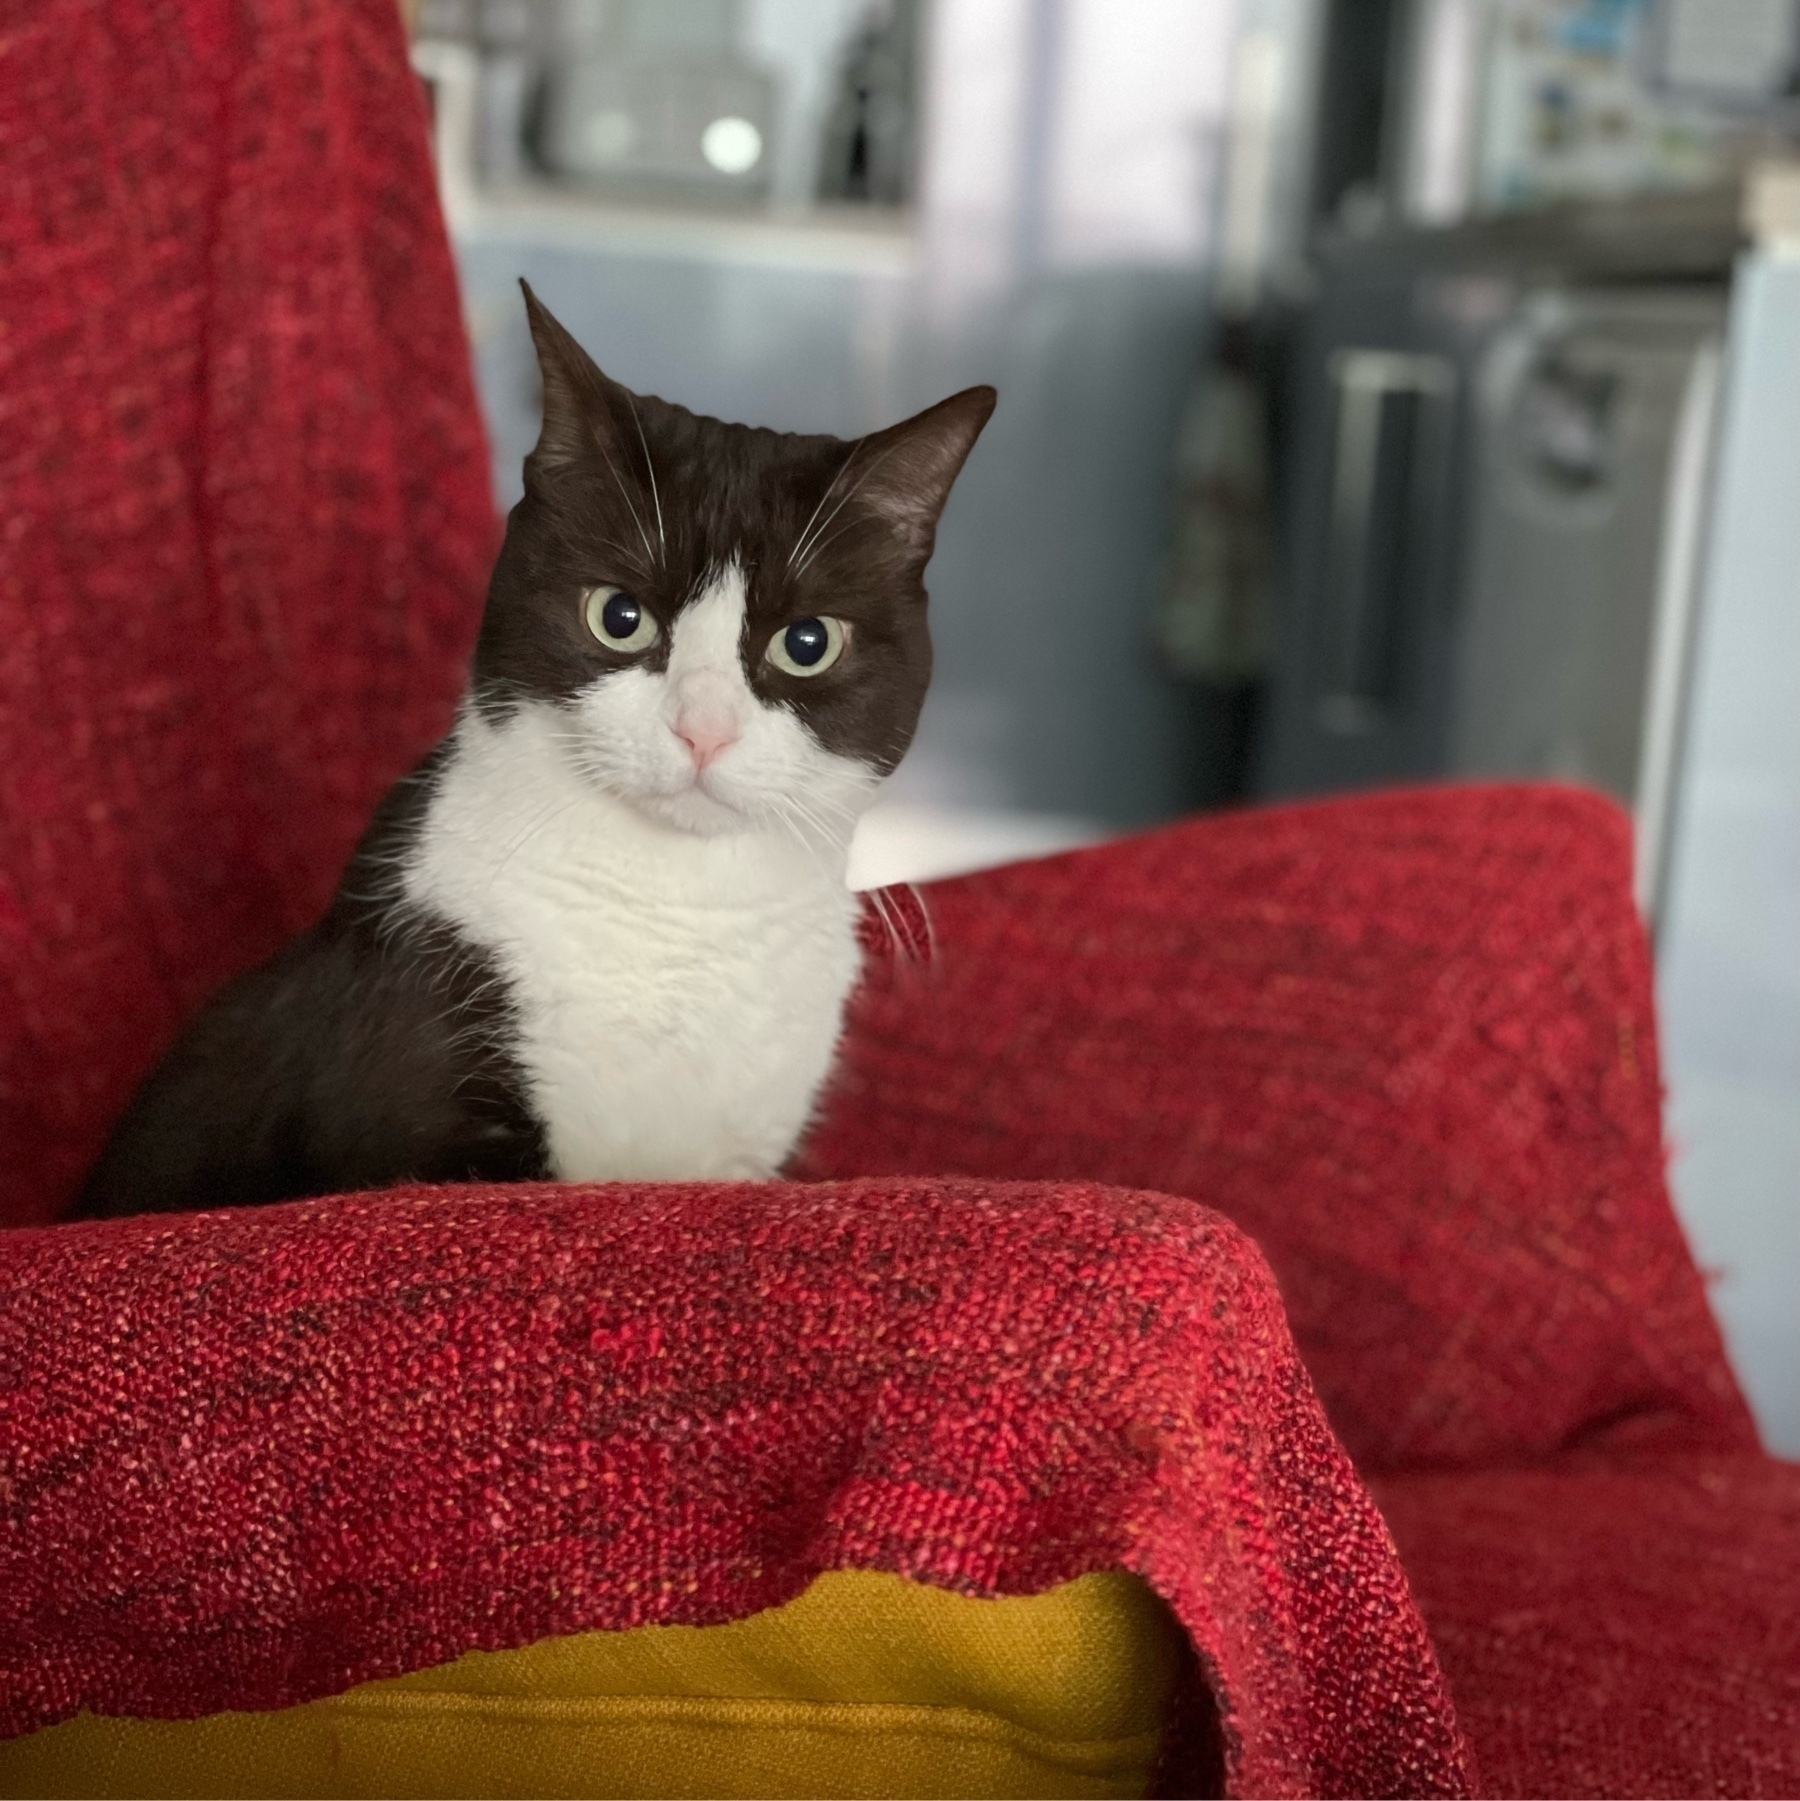 A black and white cat sitting upright in a chair covered with a red throw. The cat is frowning.